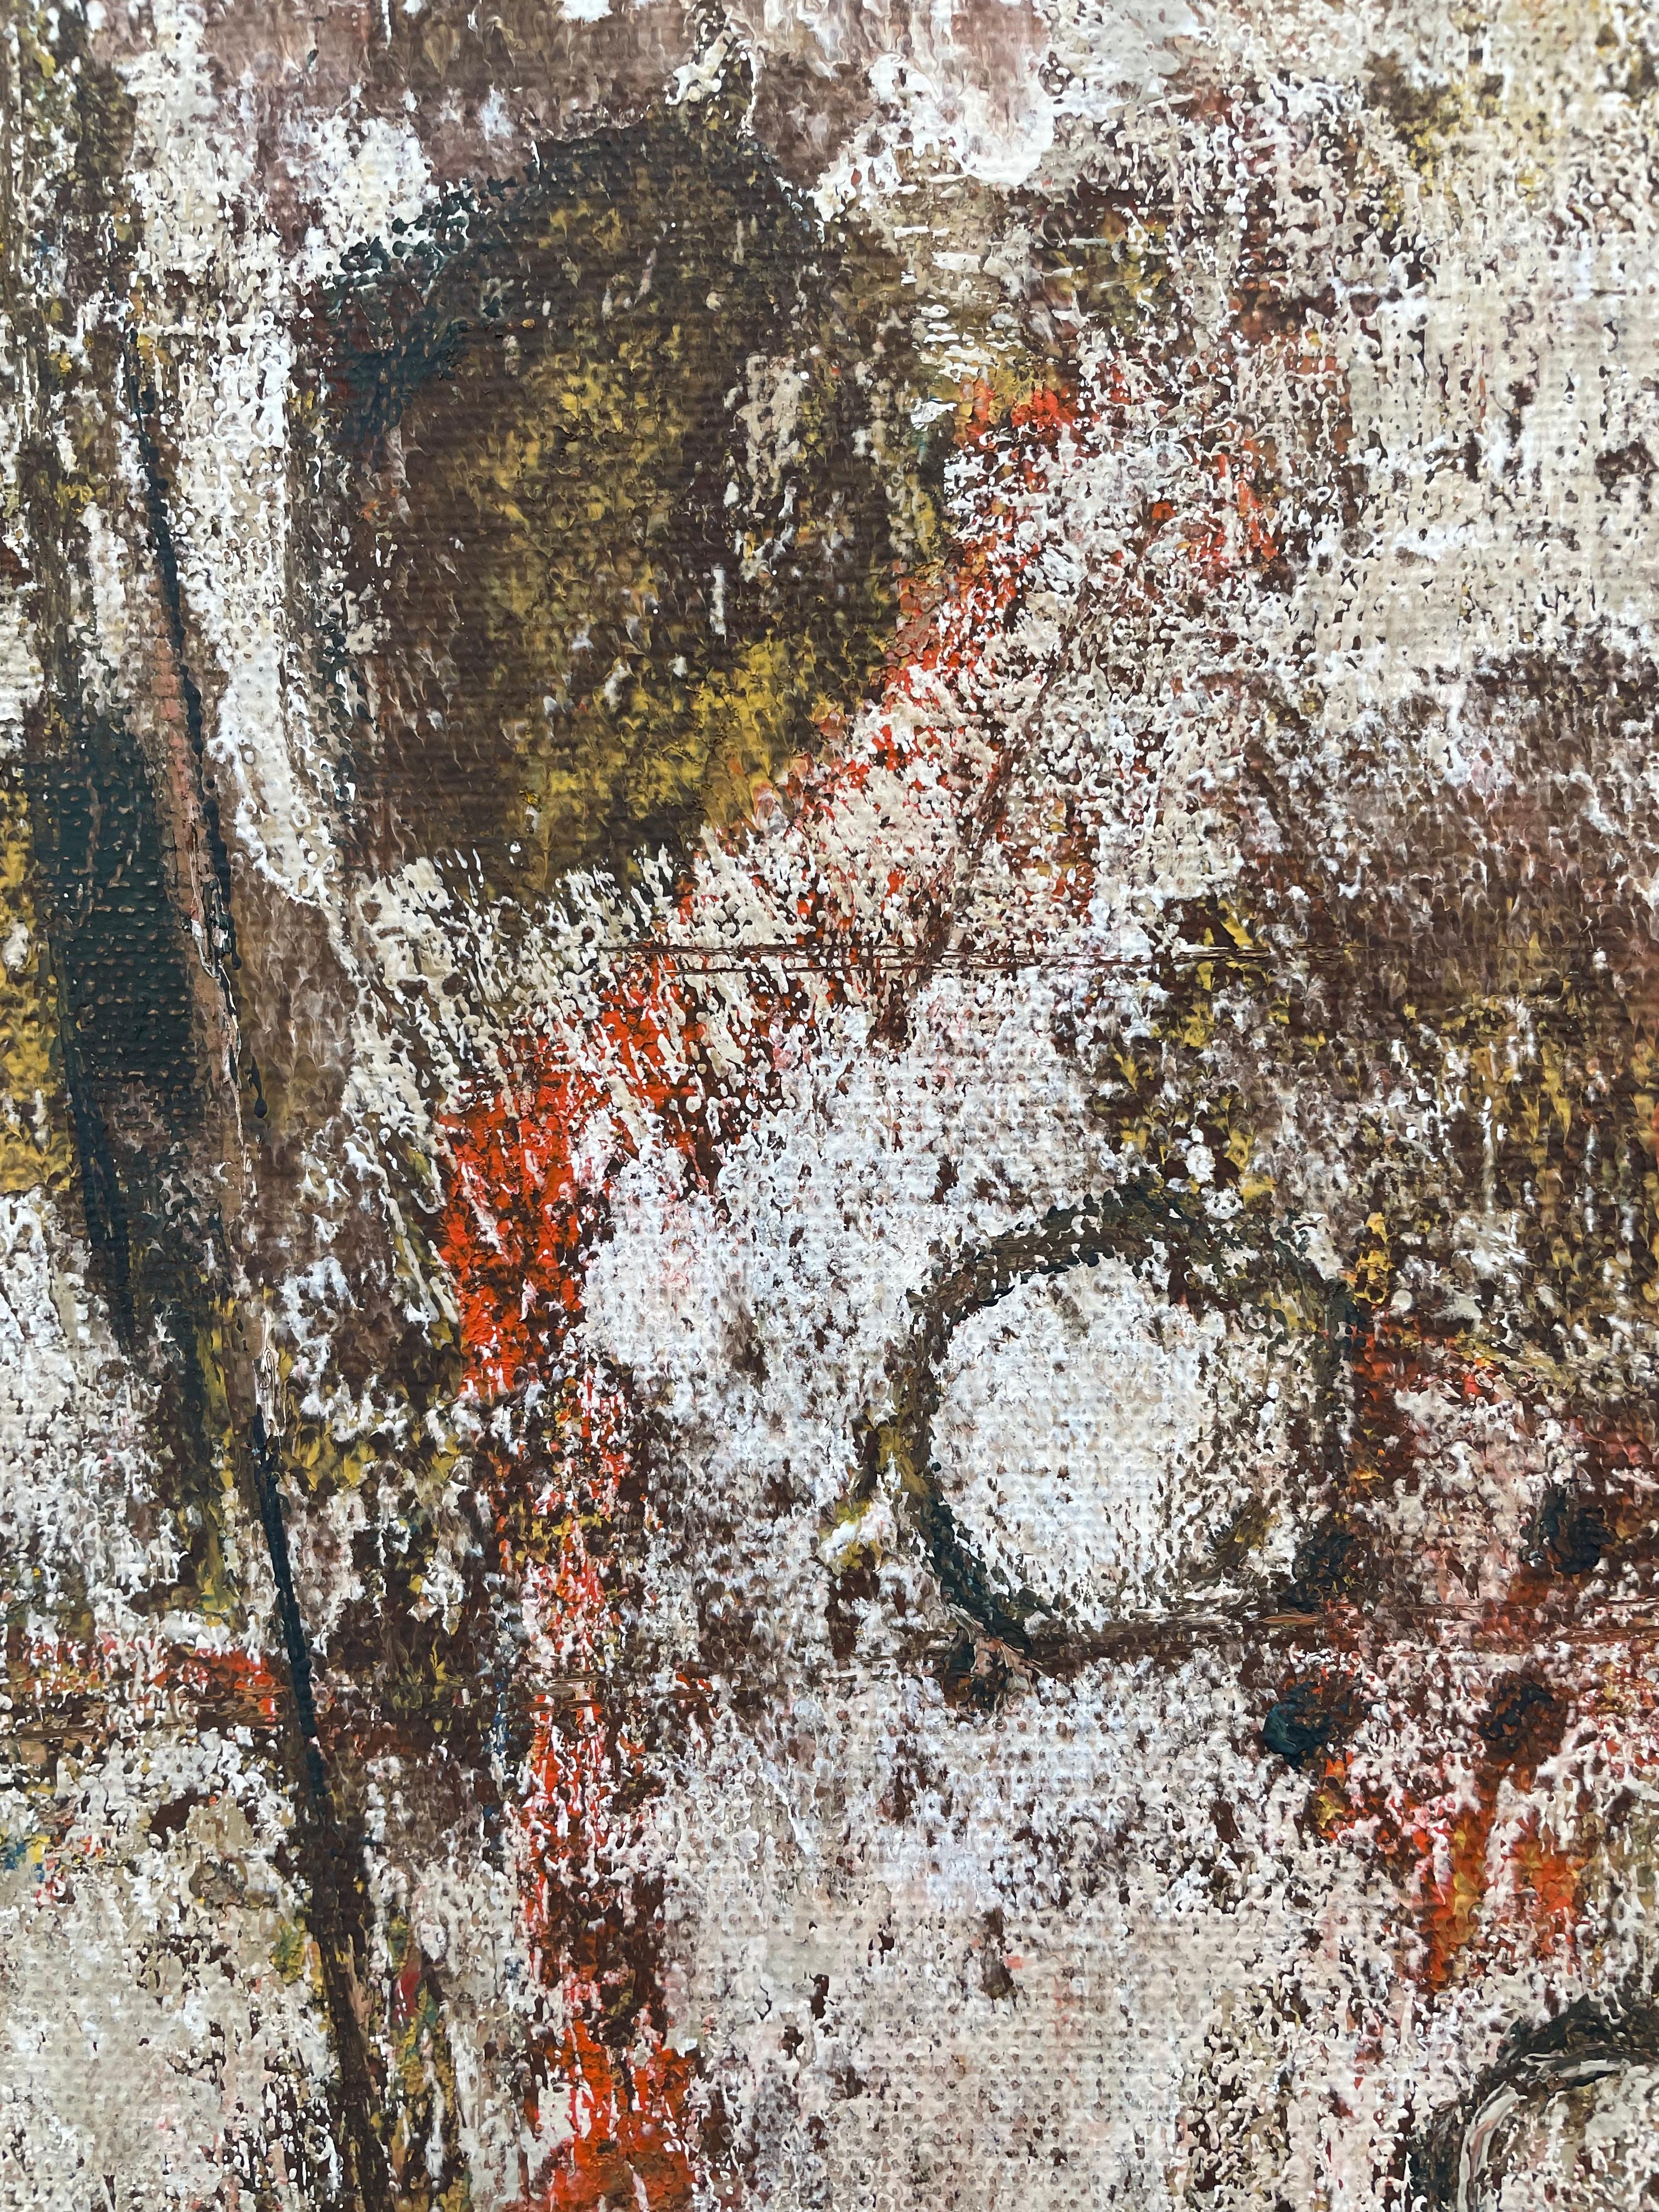 This Modern Abstract Expressionist painting by Stanley Bate is made with oil on canvas. The top portion of the painting is an earthy gold color, while the space beneath it is a textured mix of red and dark umber shapes, layered with thin white. The